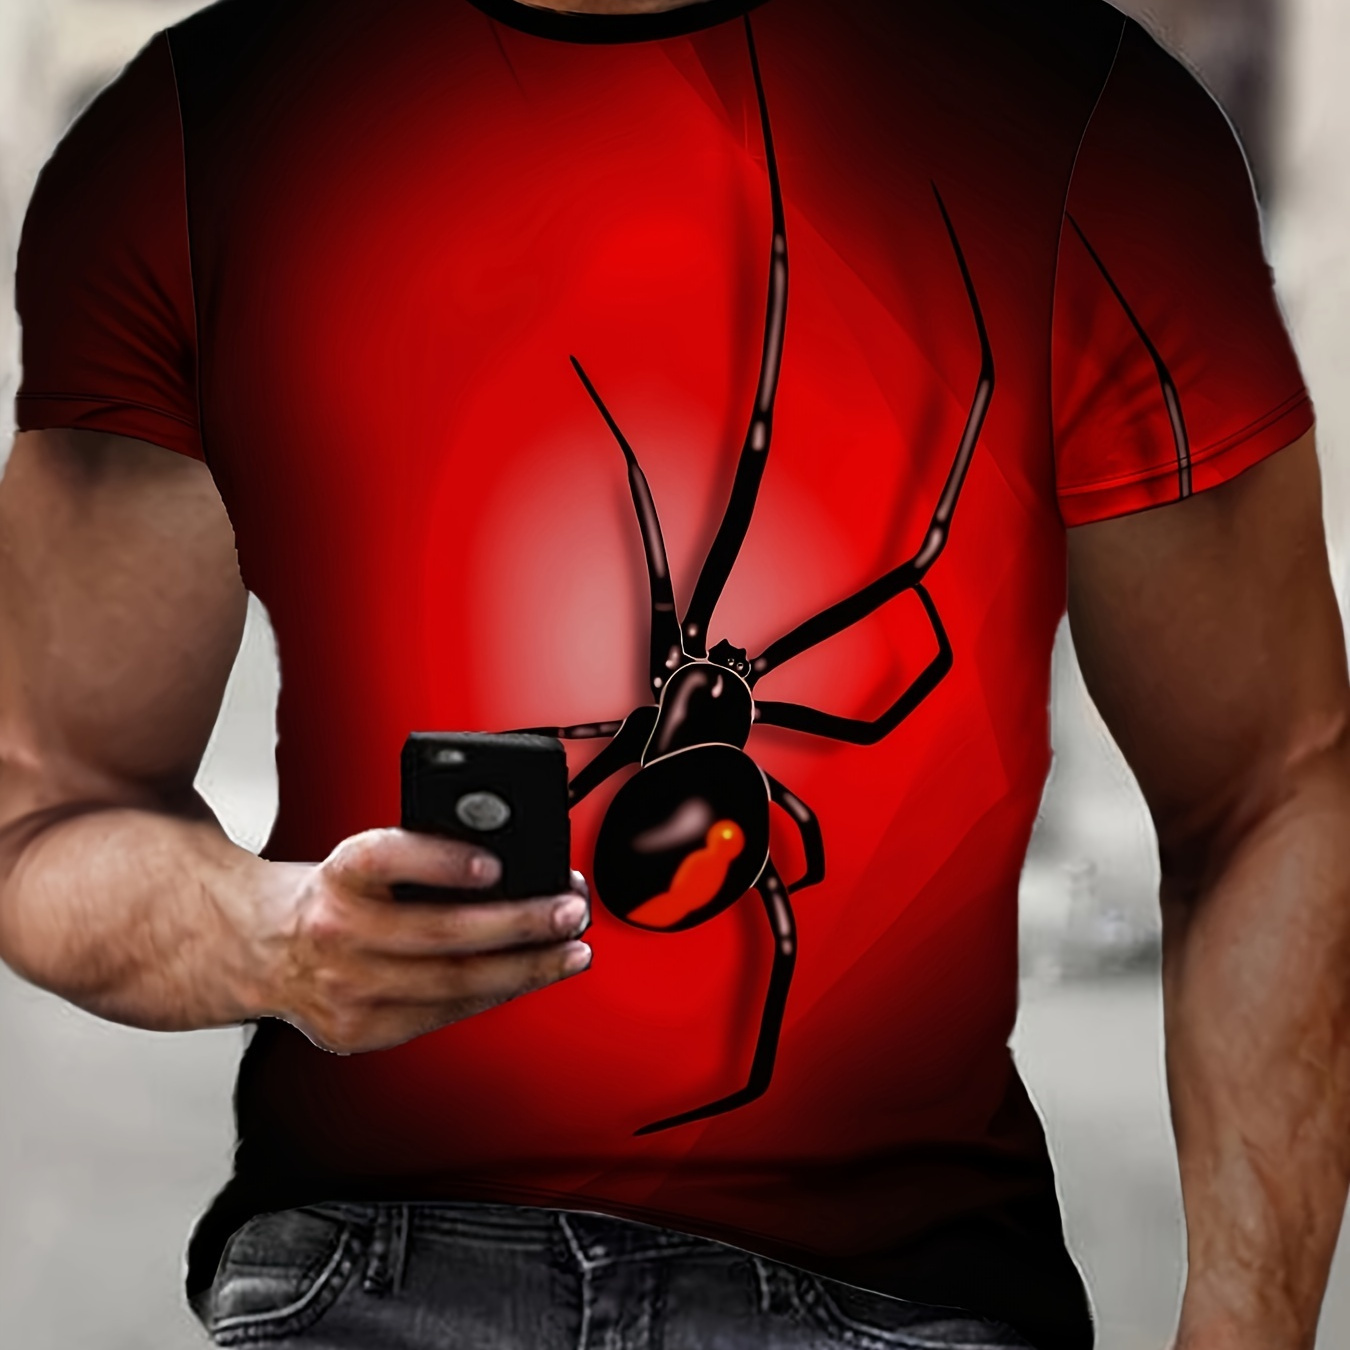 

Men's Spider Print T-shirt, Casual Short Sleeve Crew Neck Tee, Men's Clothing For Outdoor